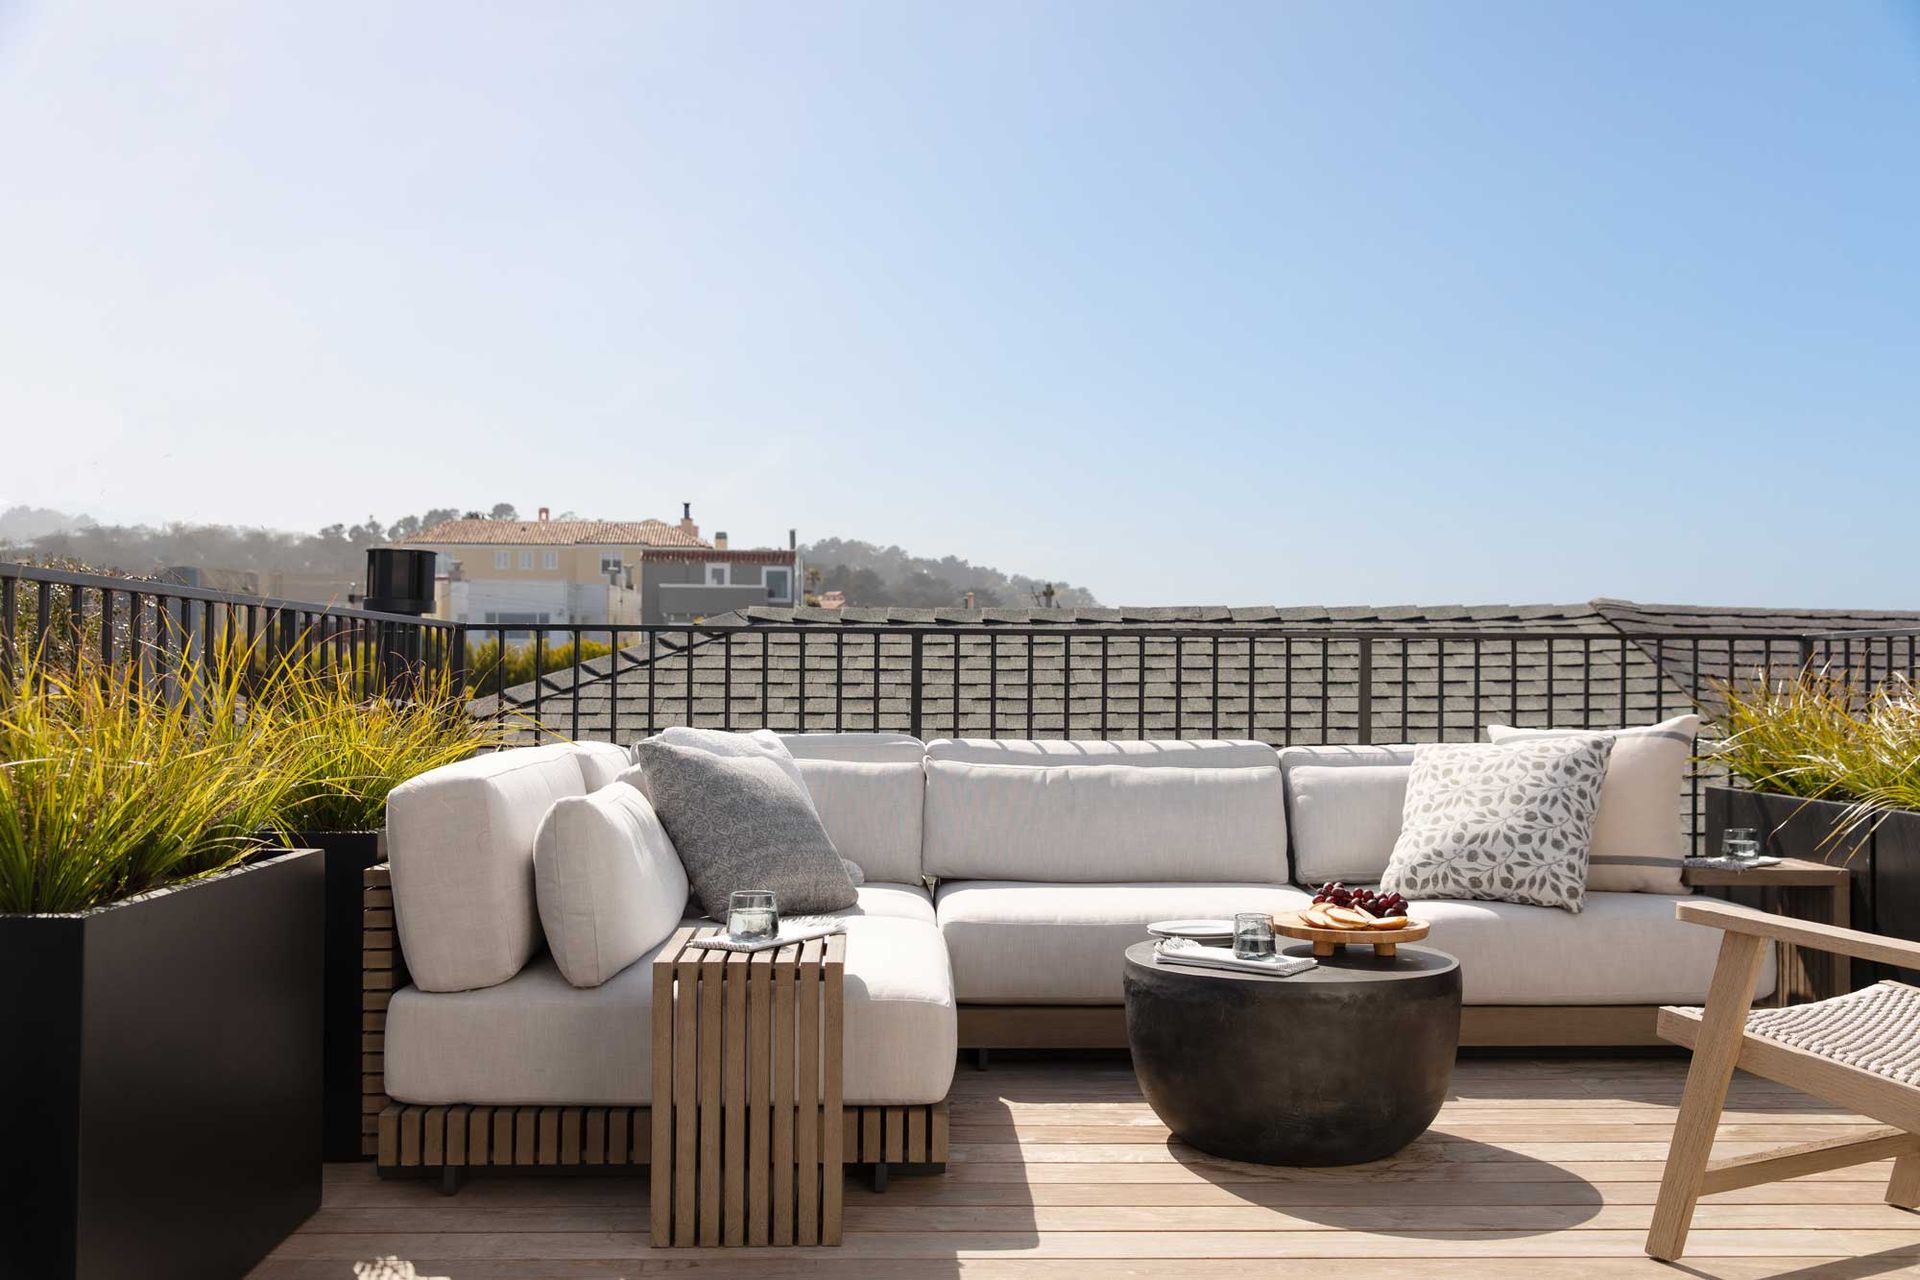 13 balcony ideas that make the most of small outdoor spaces